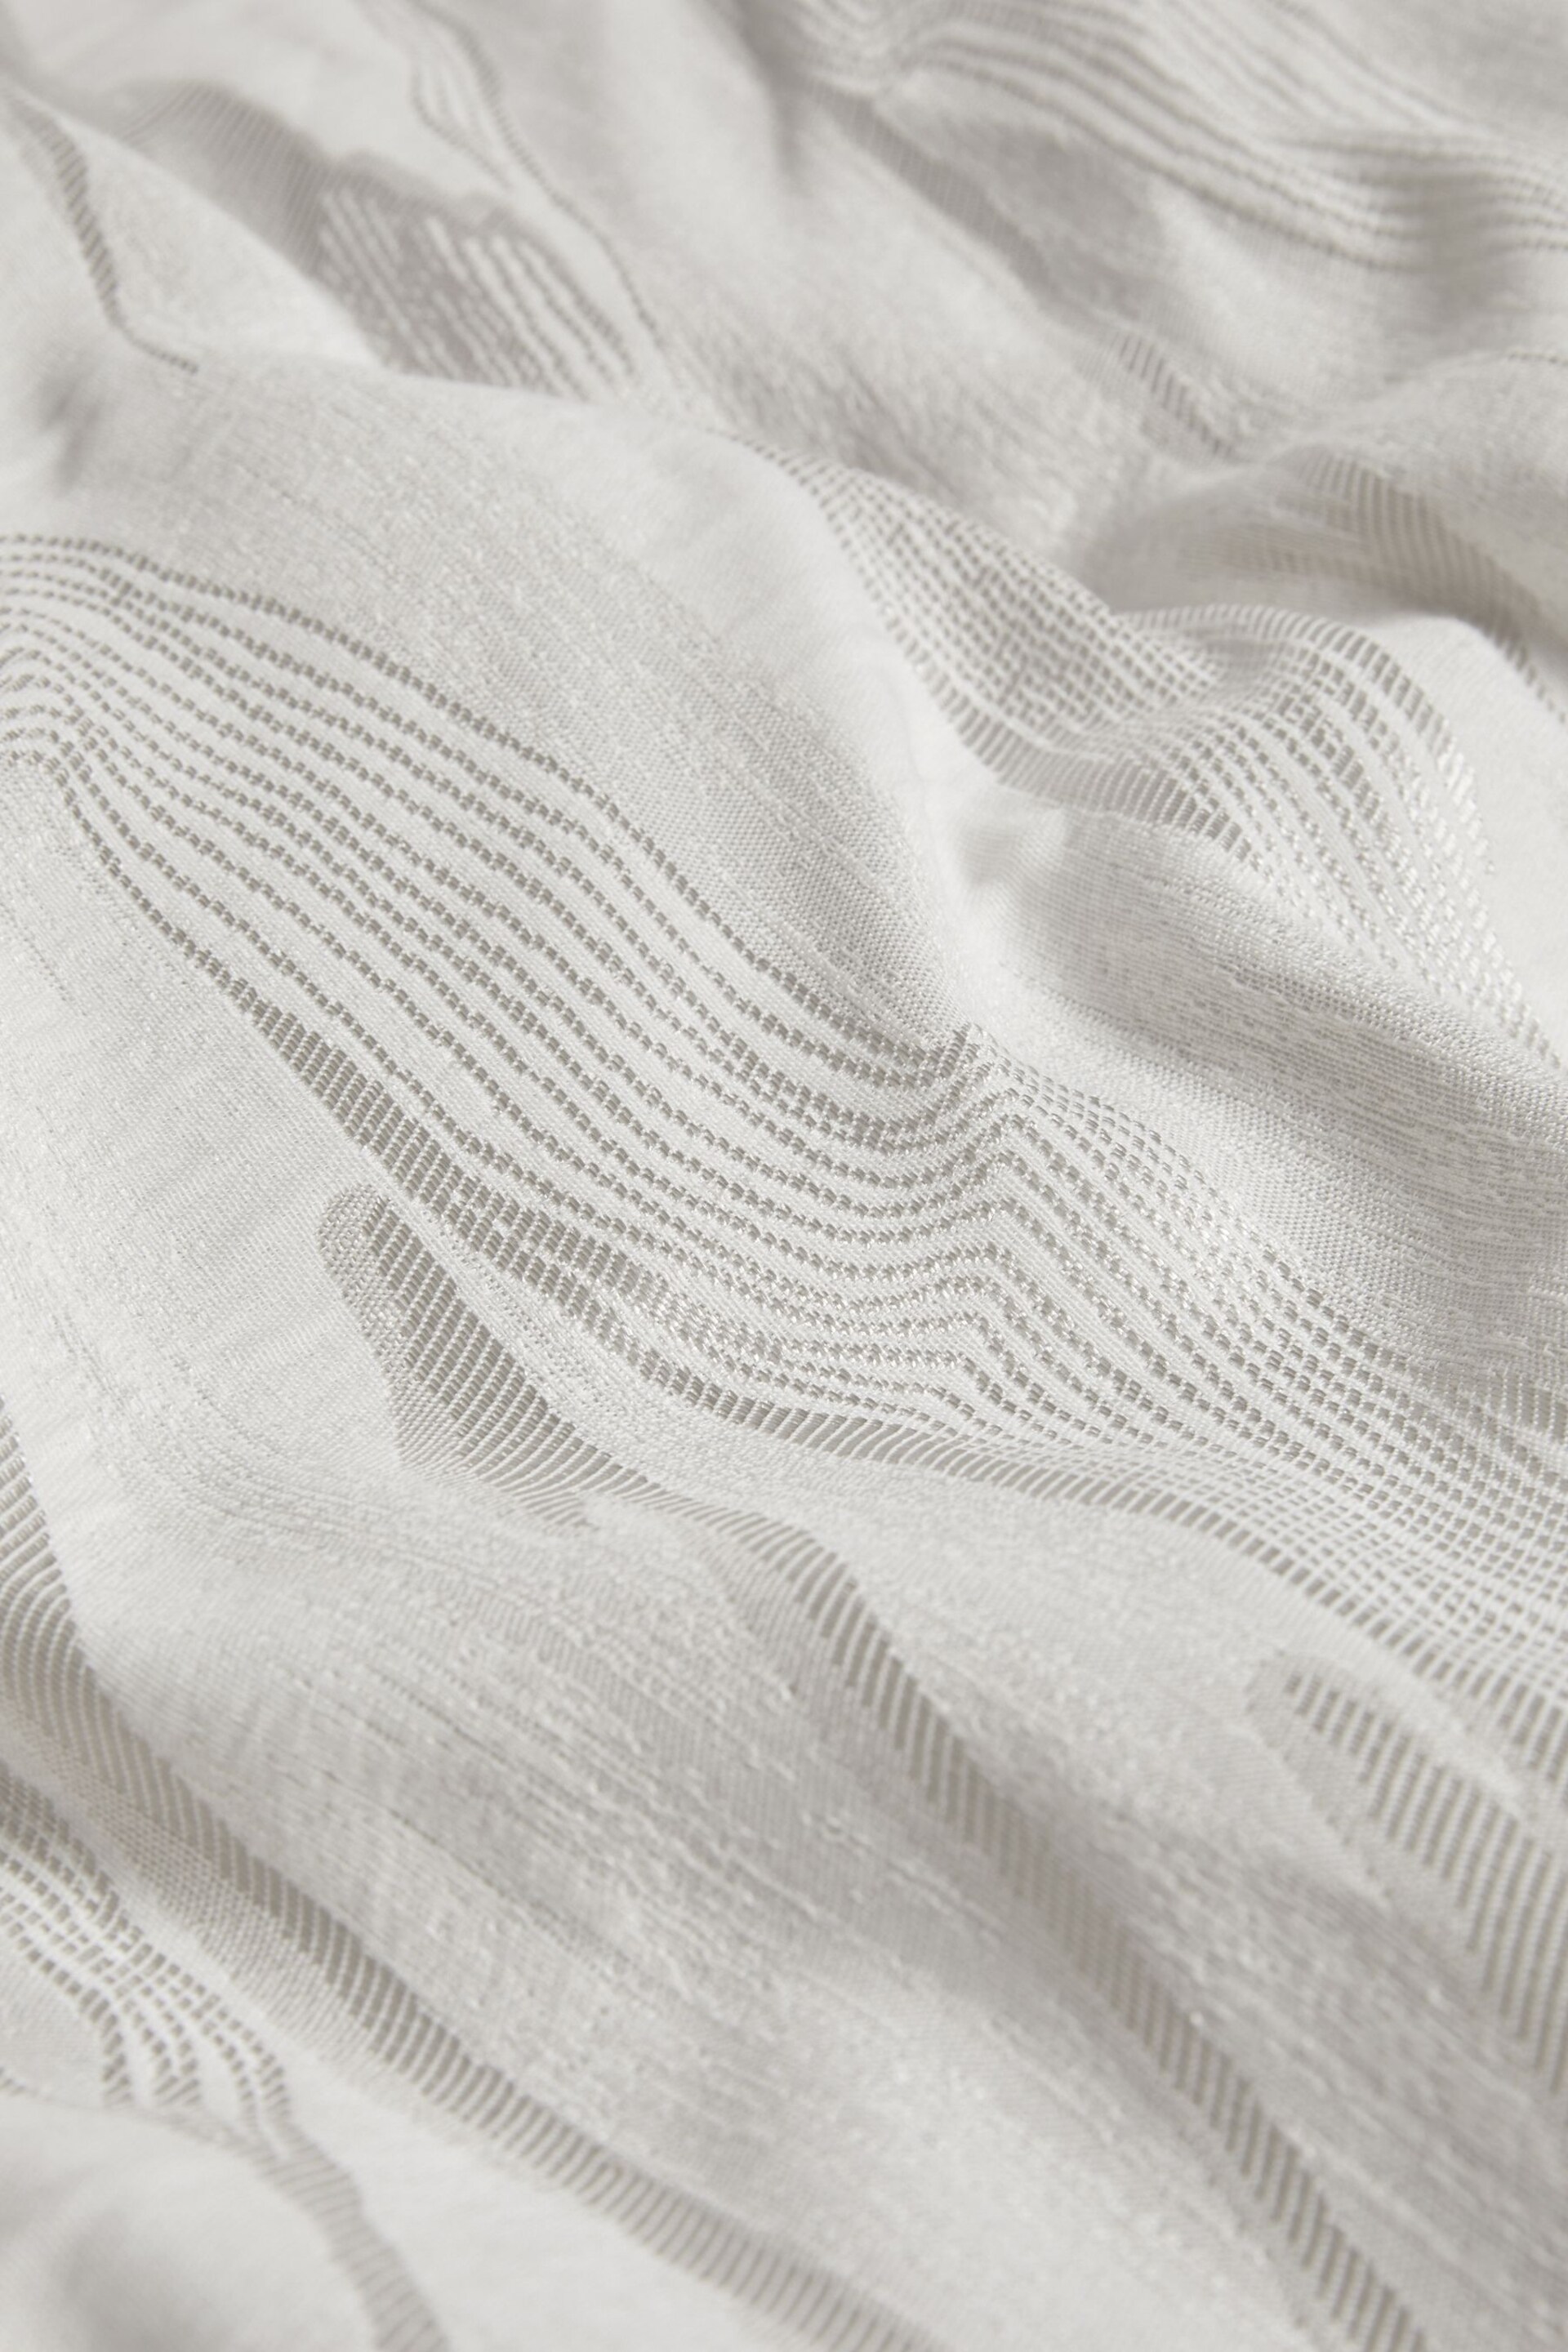 Silver/White Valencia Marble Jacquard Duvet Cover and Pillowcase Set - Image 6 of 6